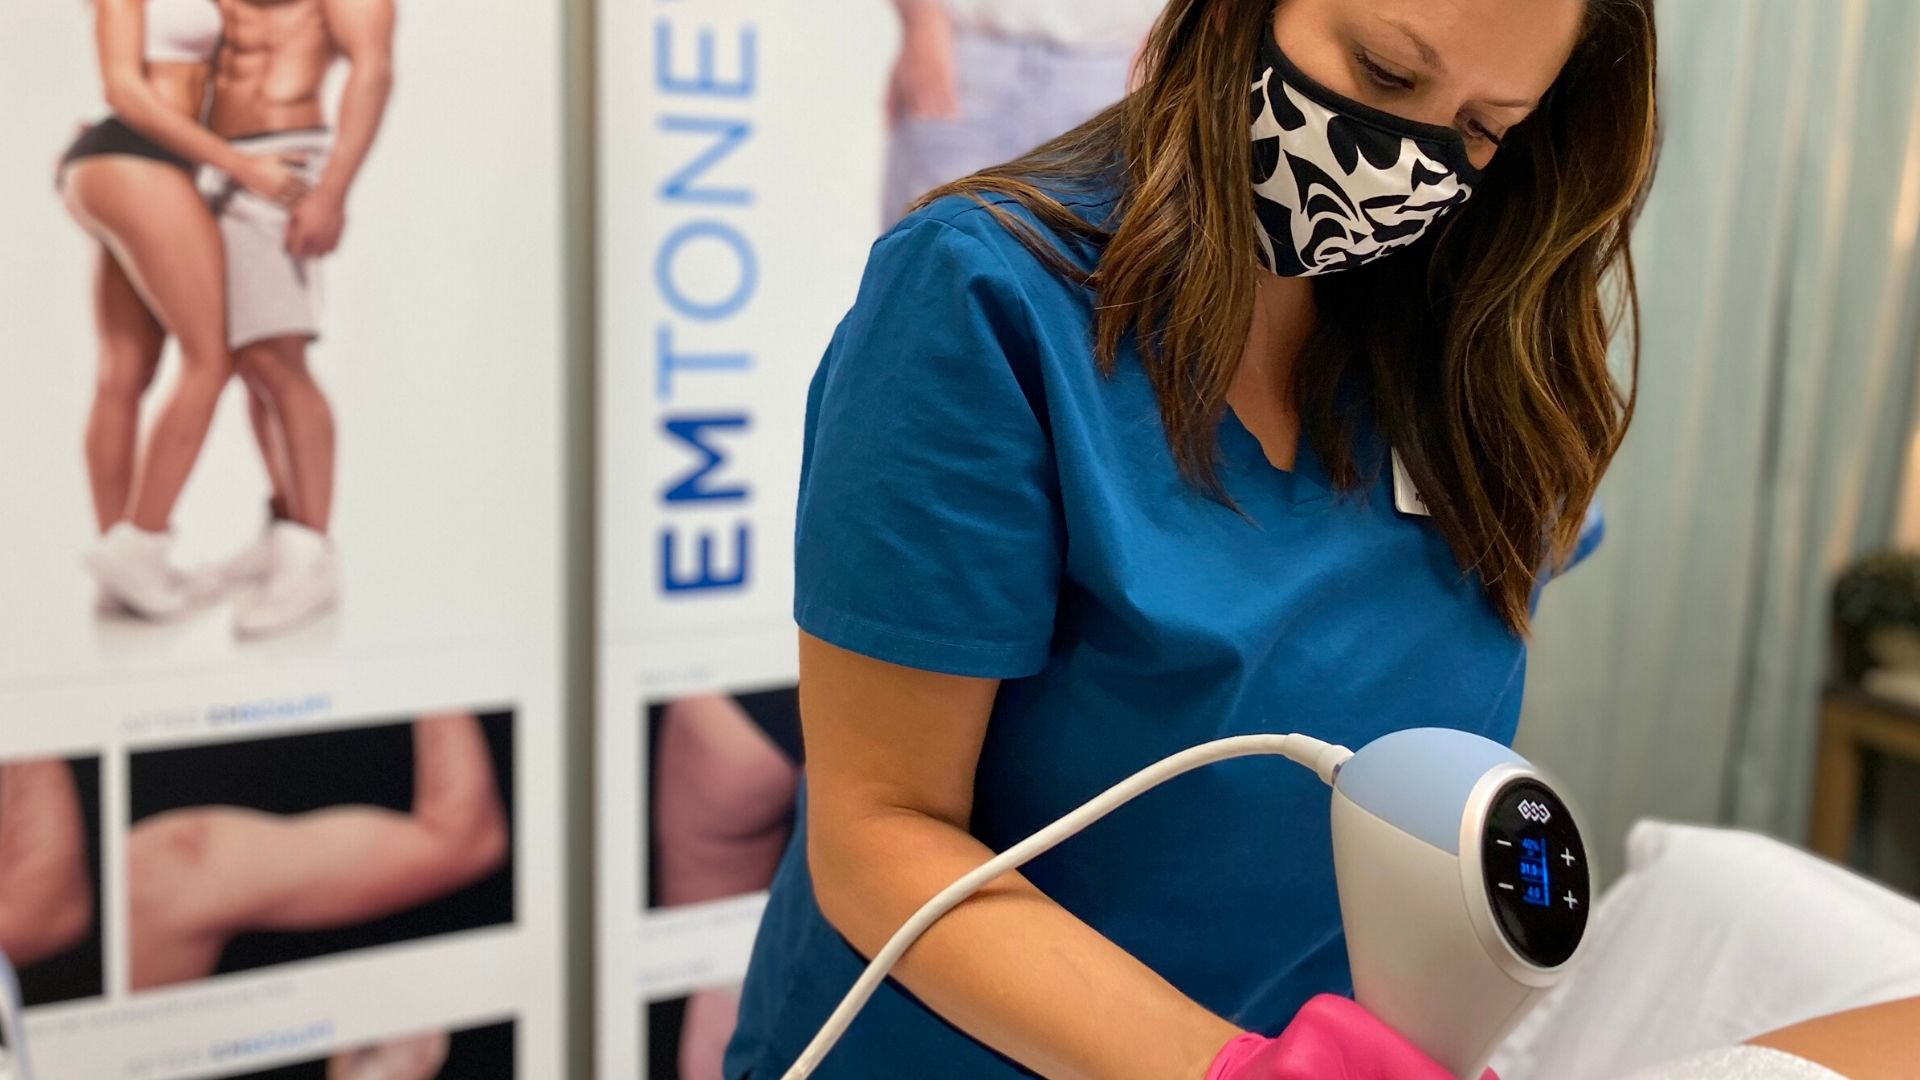 A practitioner performs an Emtone treatment in Bentonville